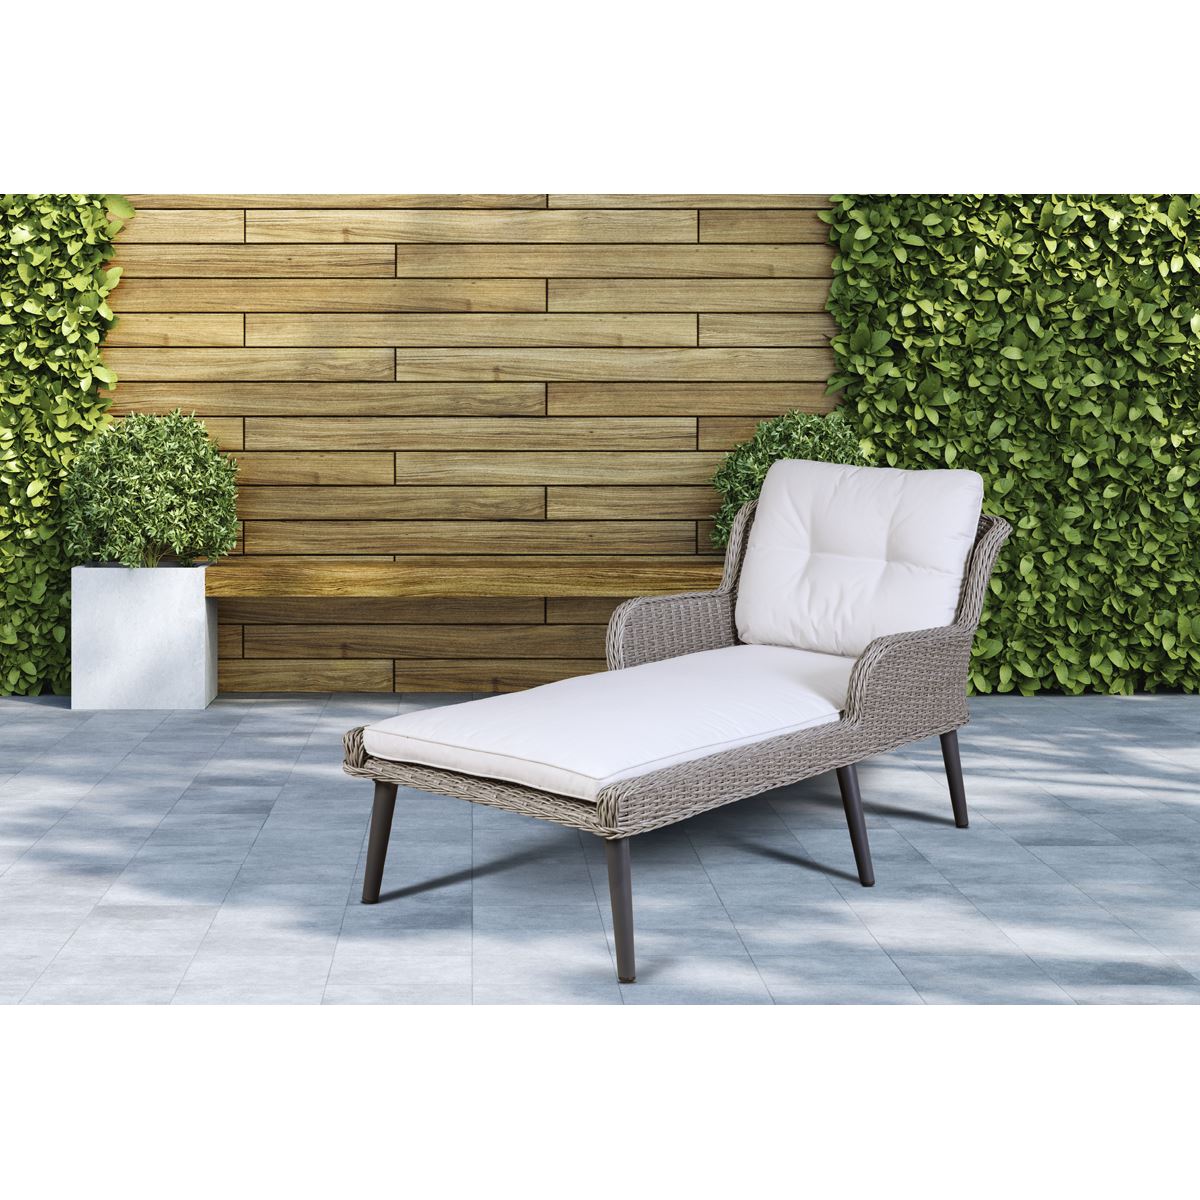 Dellonda Buxton Rattan Wicker Sun Lounger with Armrests Washable Cushions, Grey